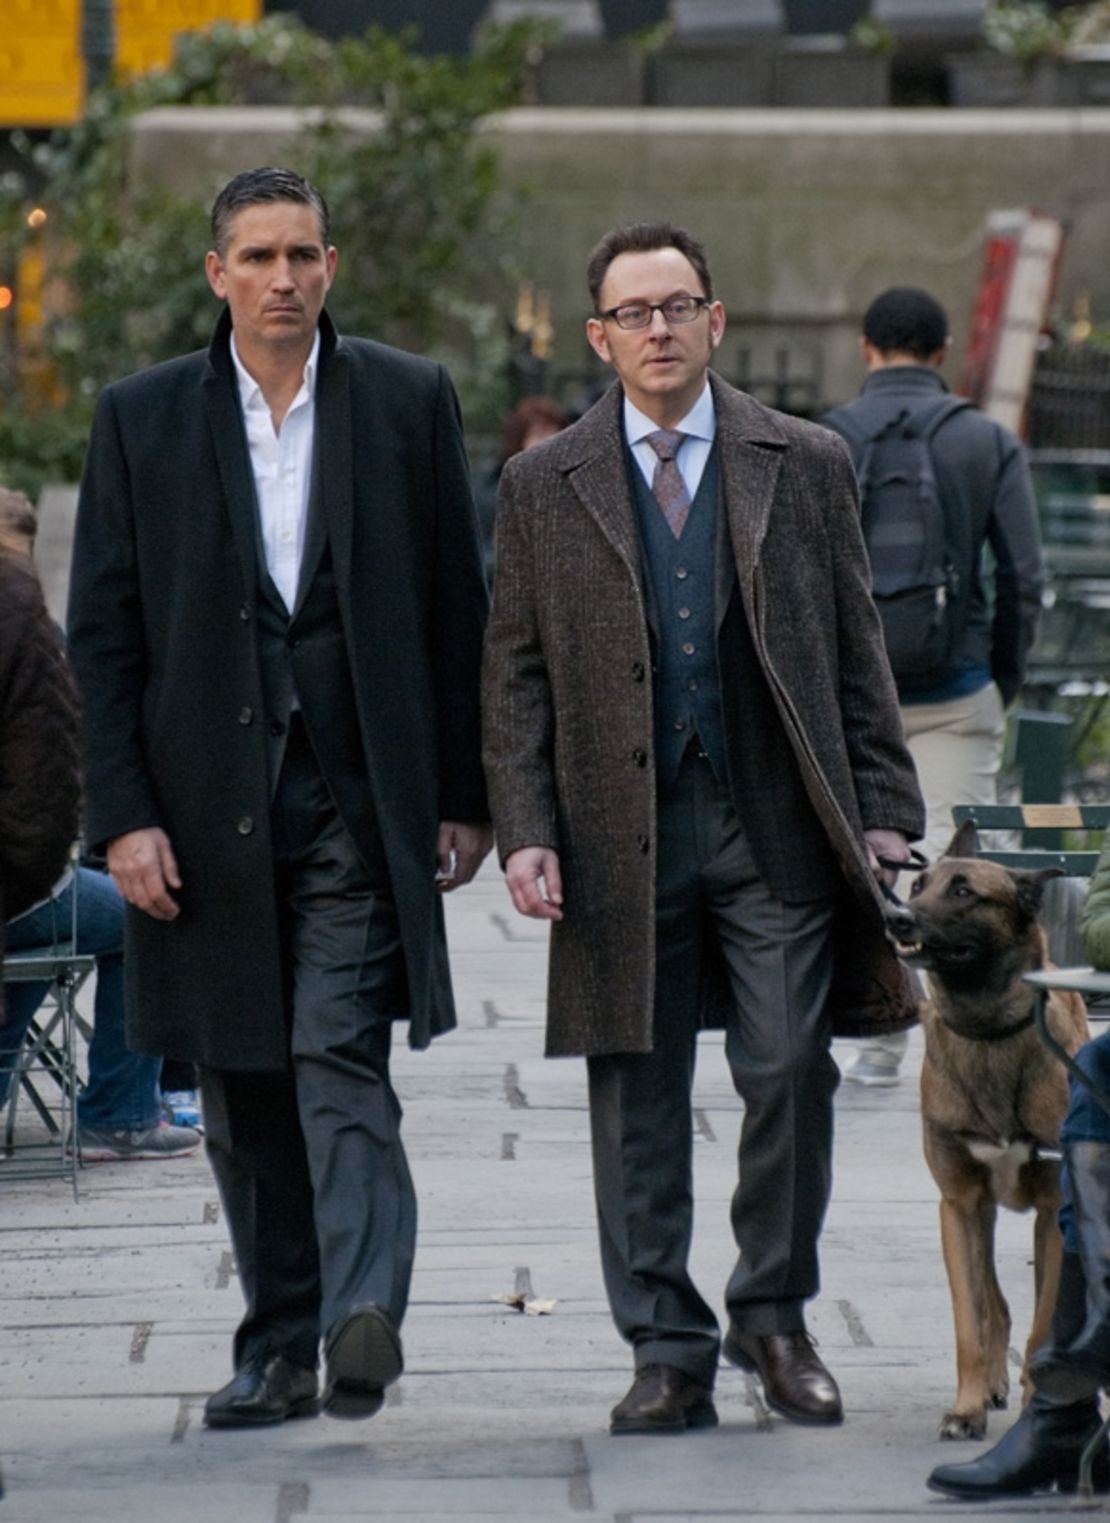 "Person of Interest" stars Jim Caviezel and Michael Emerson as two men using the surveillance state to right wrongs.